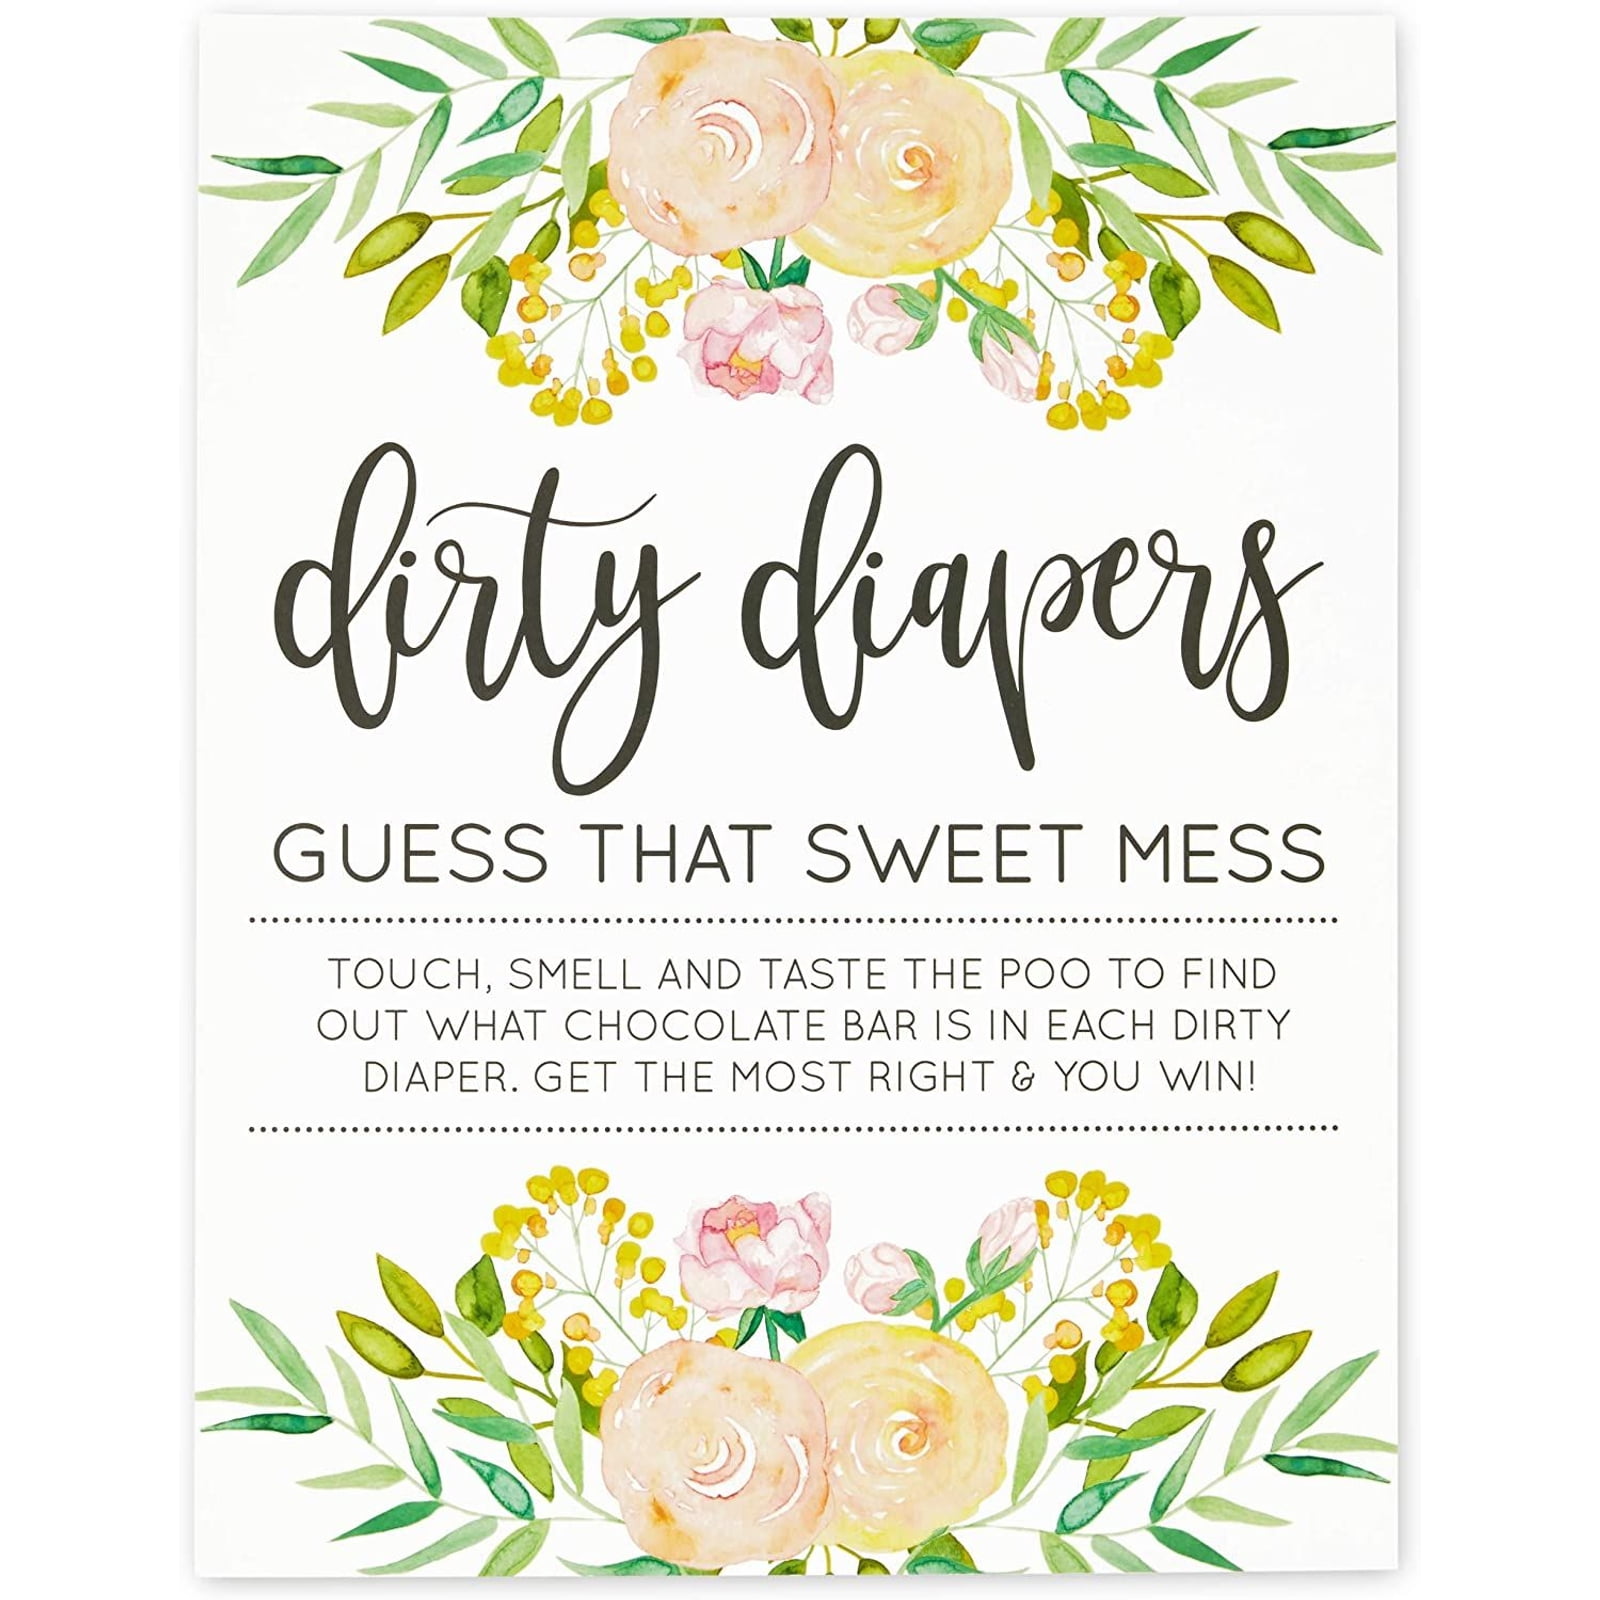 Dirty Nappy Diaper Baby Shower Guessing Game Boy Girl Unisex Guess The Mess Poo 